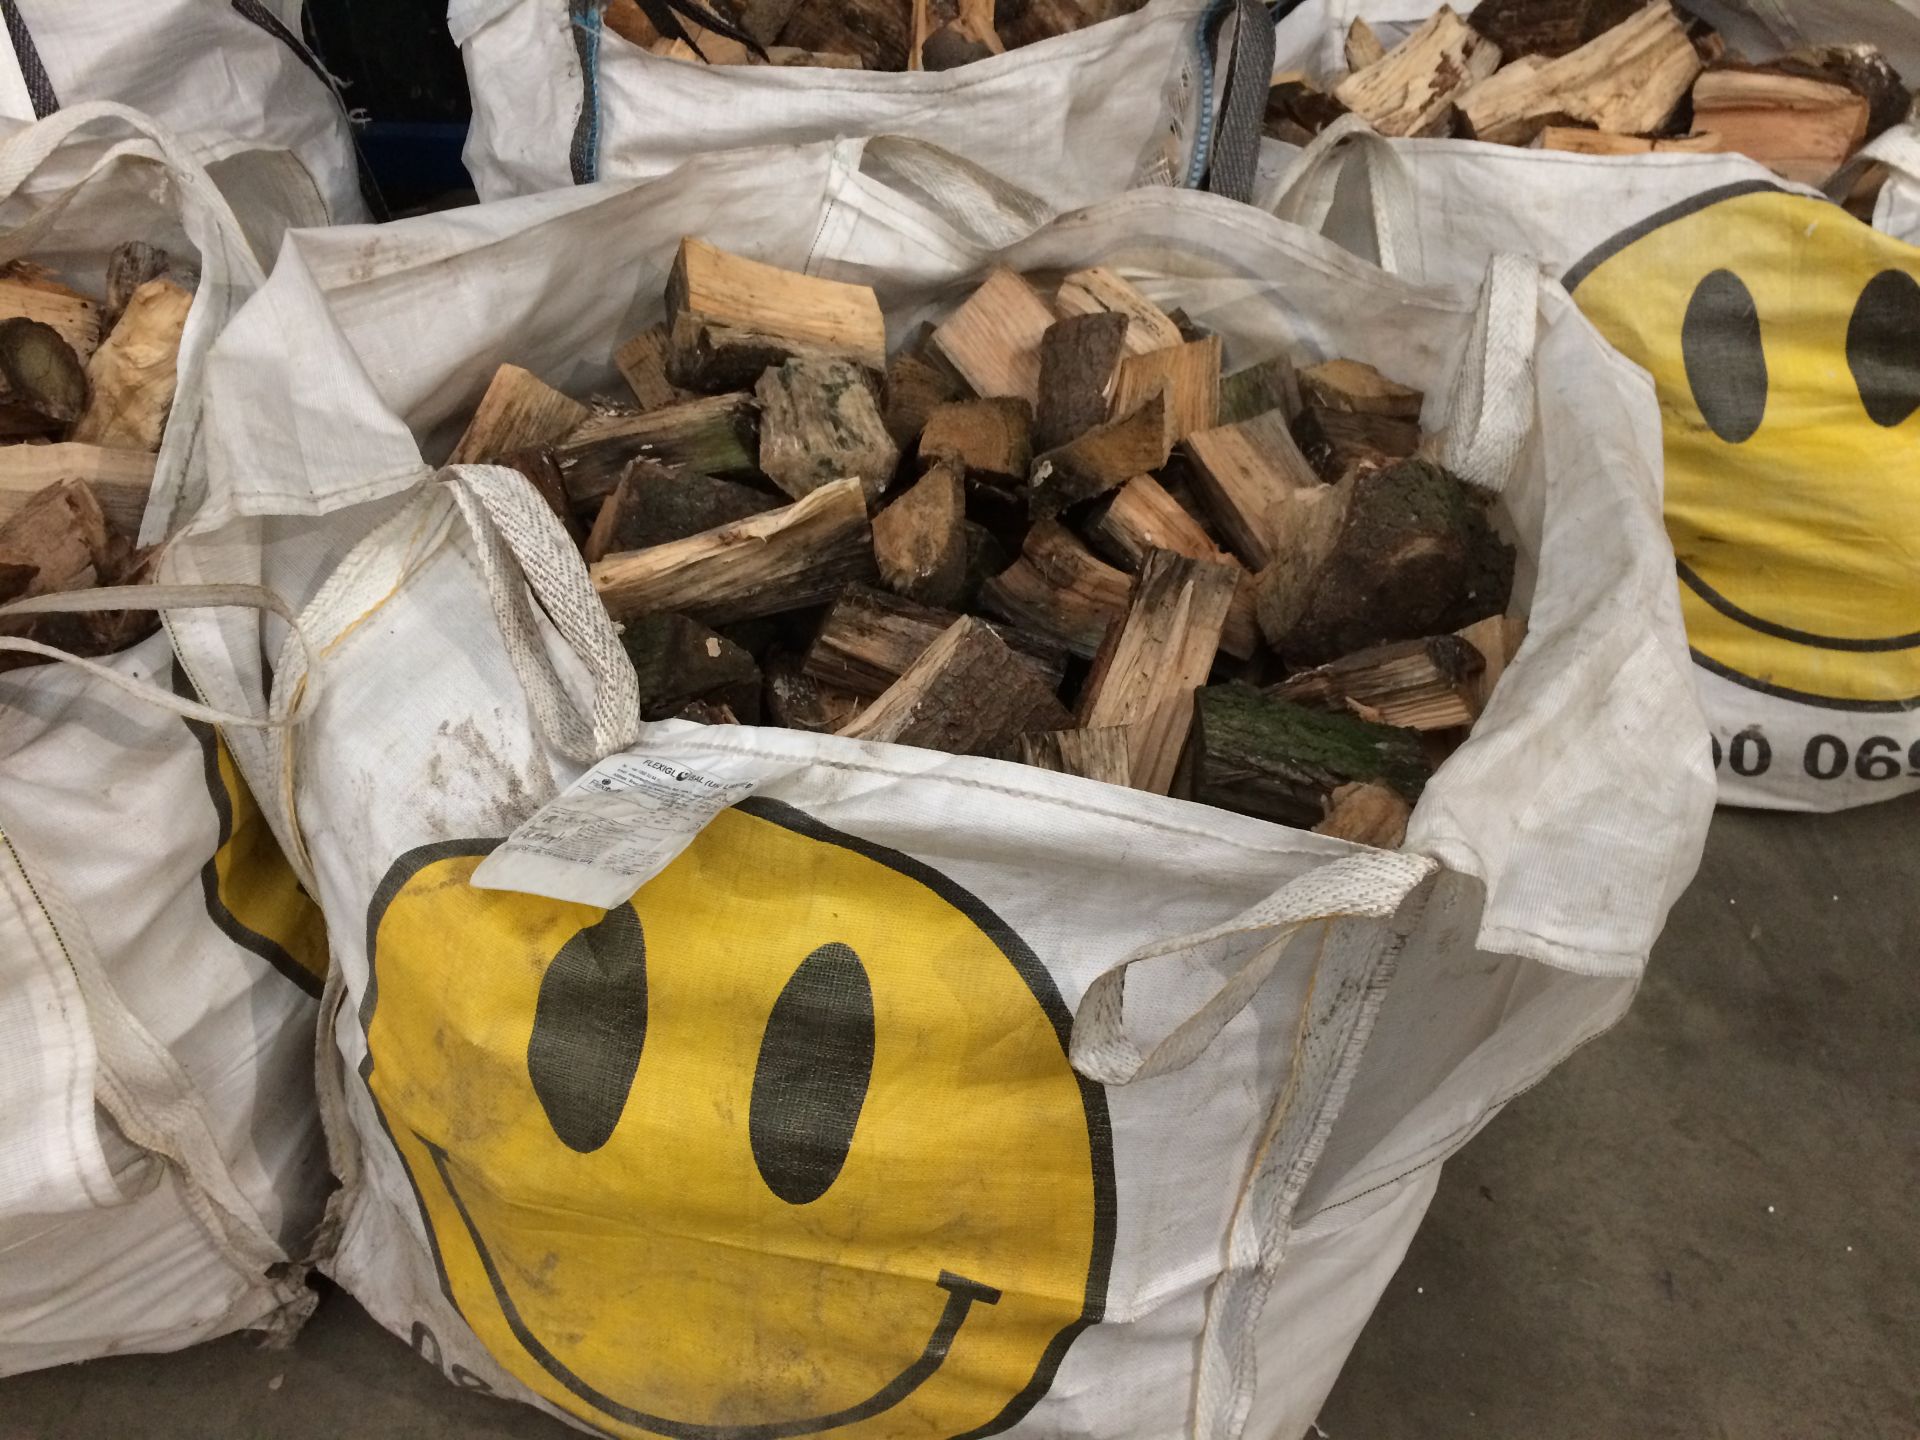 Contents to builders sack - fire logs